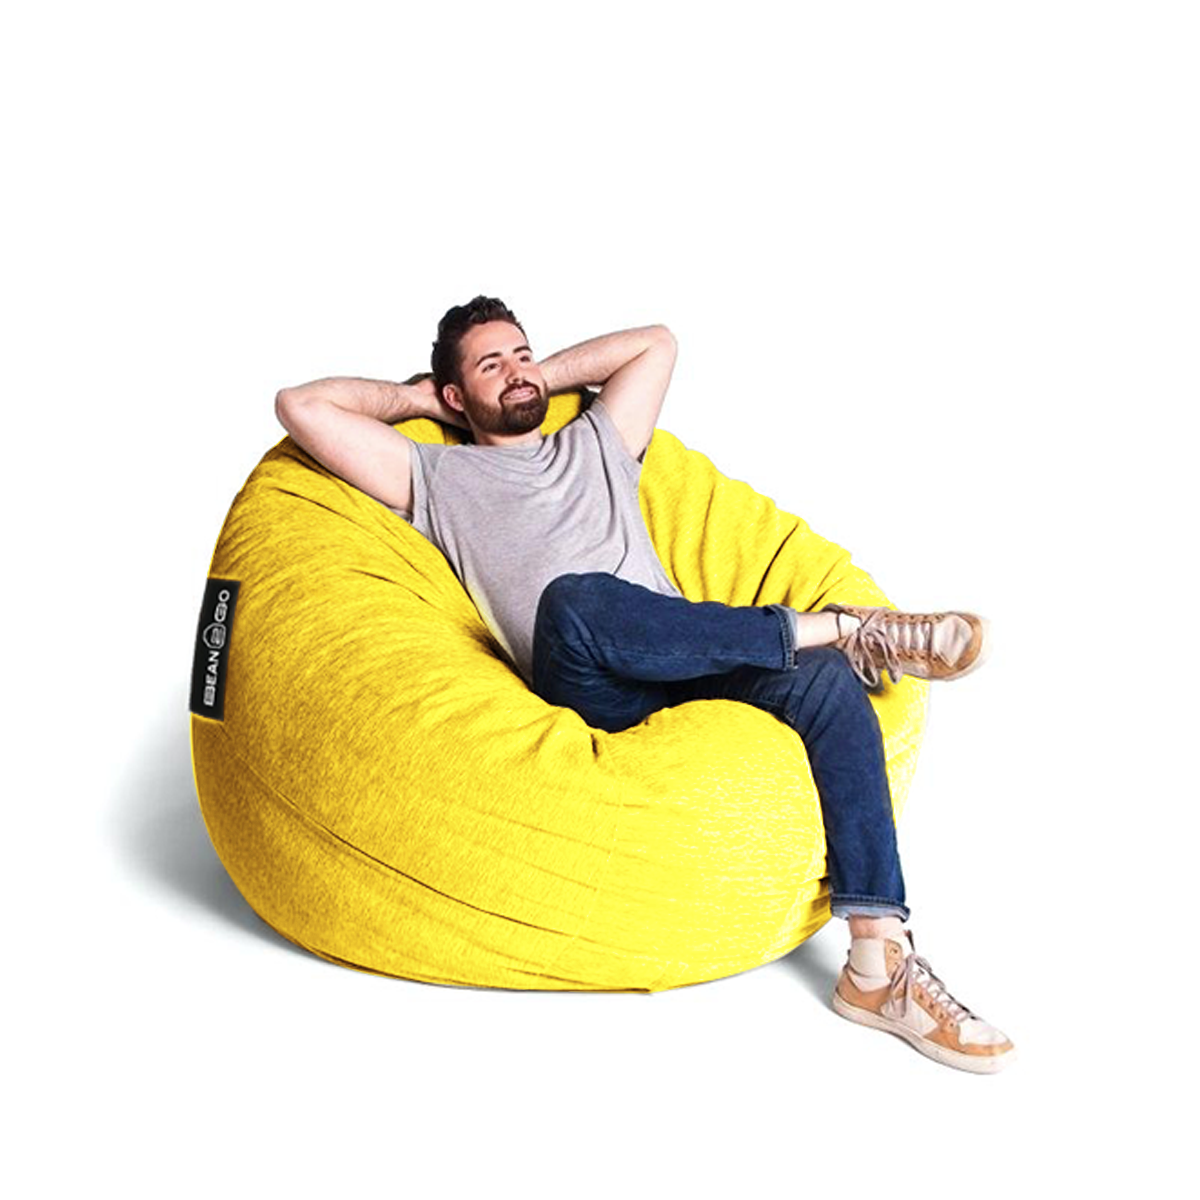 6223008411478 - Giant Fabric BeanBag 115 x 90 cm by bean2go - Available with different colors